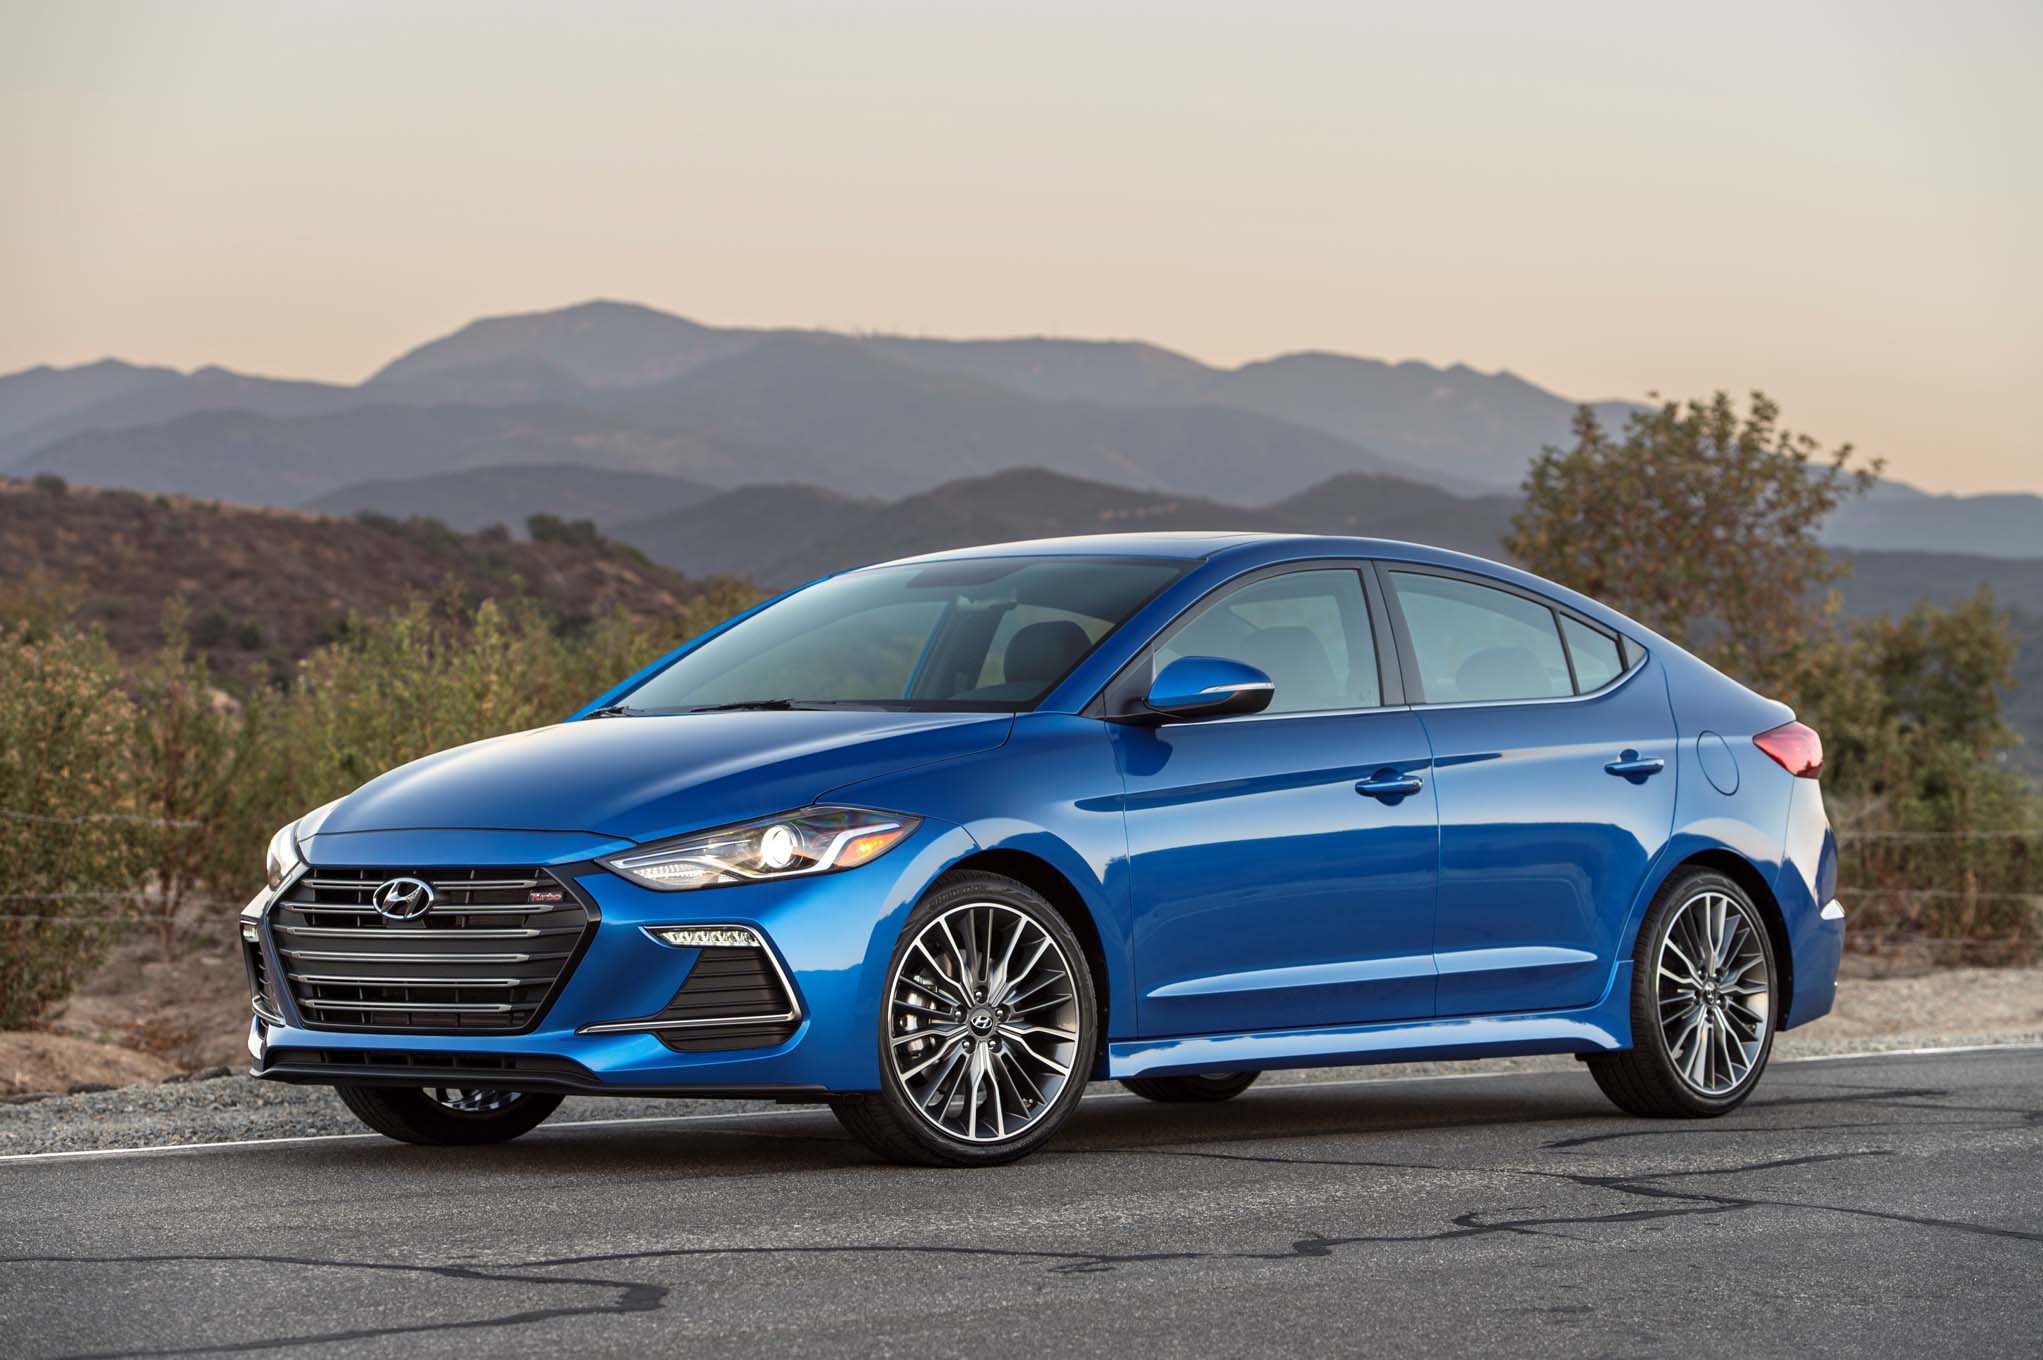 2017 Hyundai Elantra Eco review Stuck in the middle